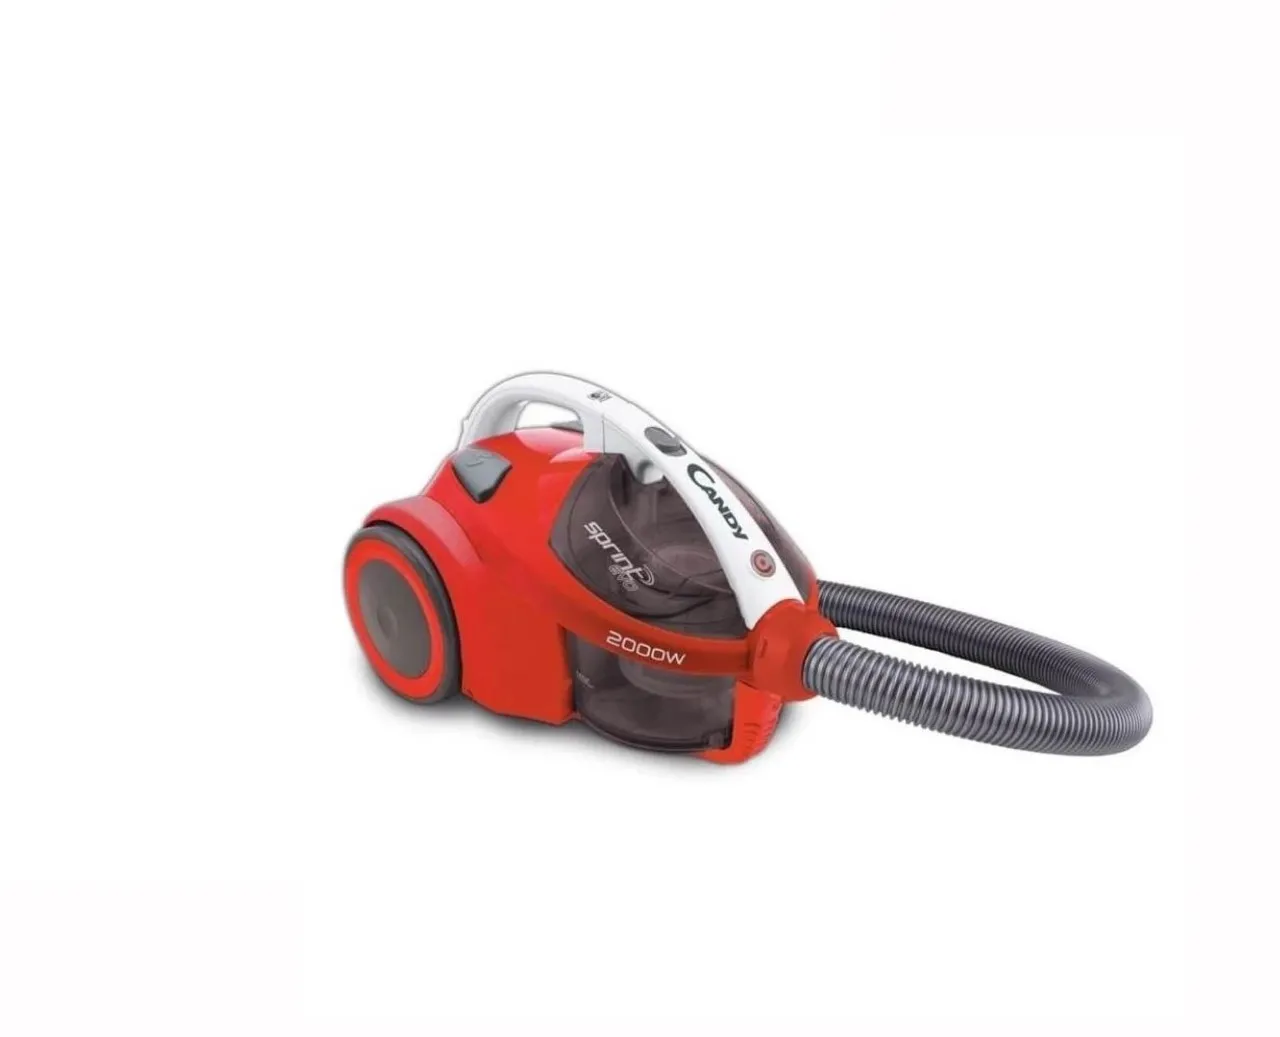 Candy 1.5 Liter Bagless Vacuum Cleaner 2000 Watts Color Red Model CSE2000001 | 1 Year Warranty